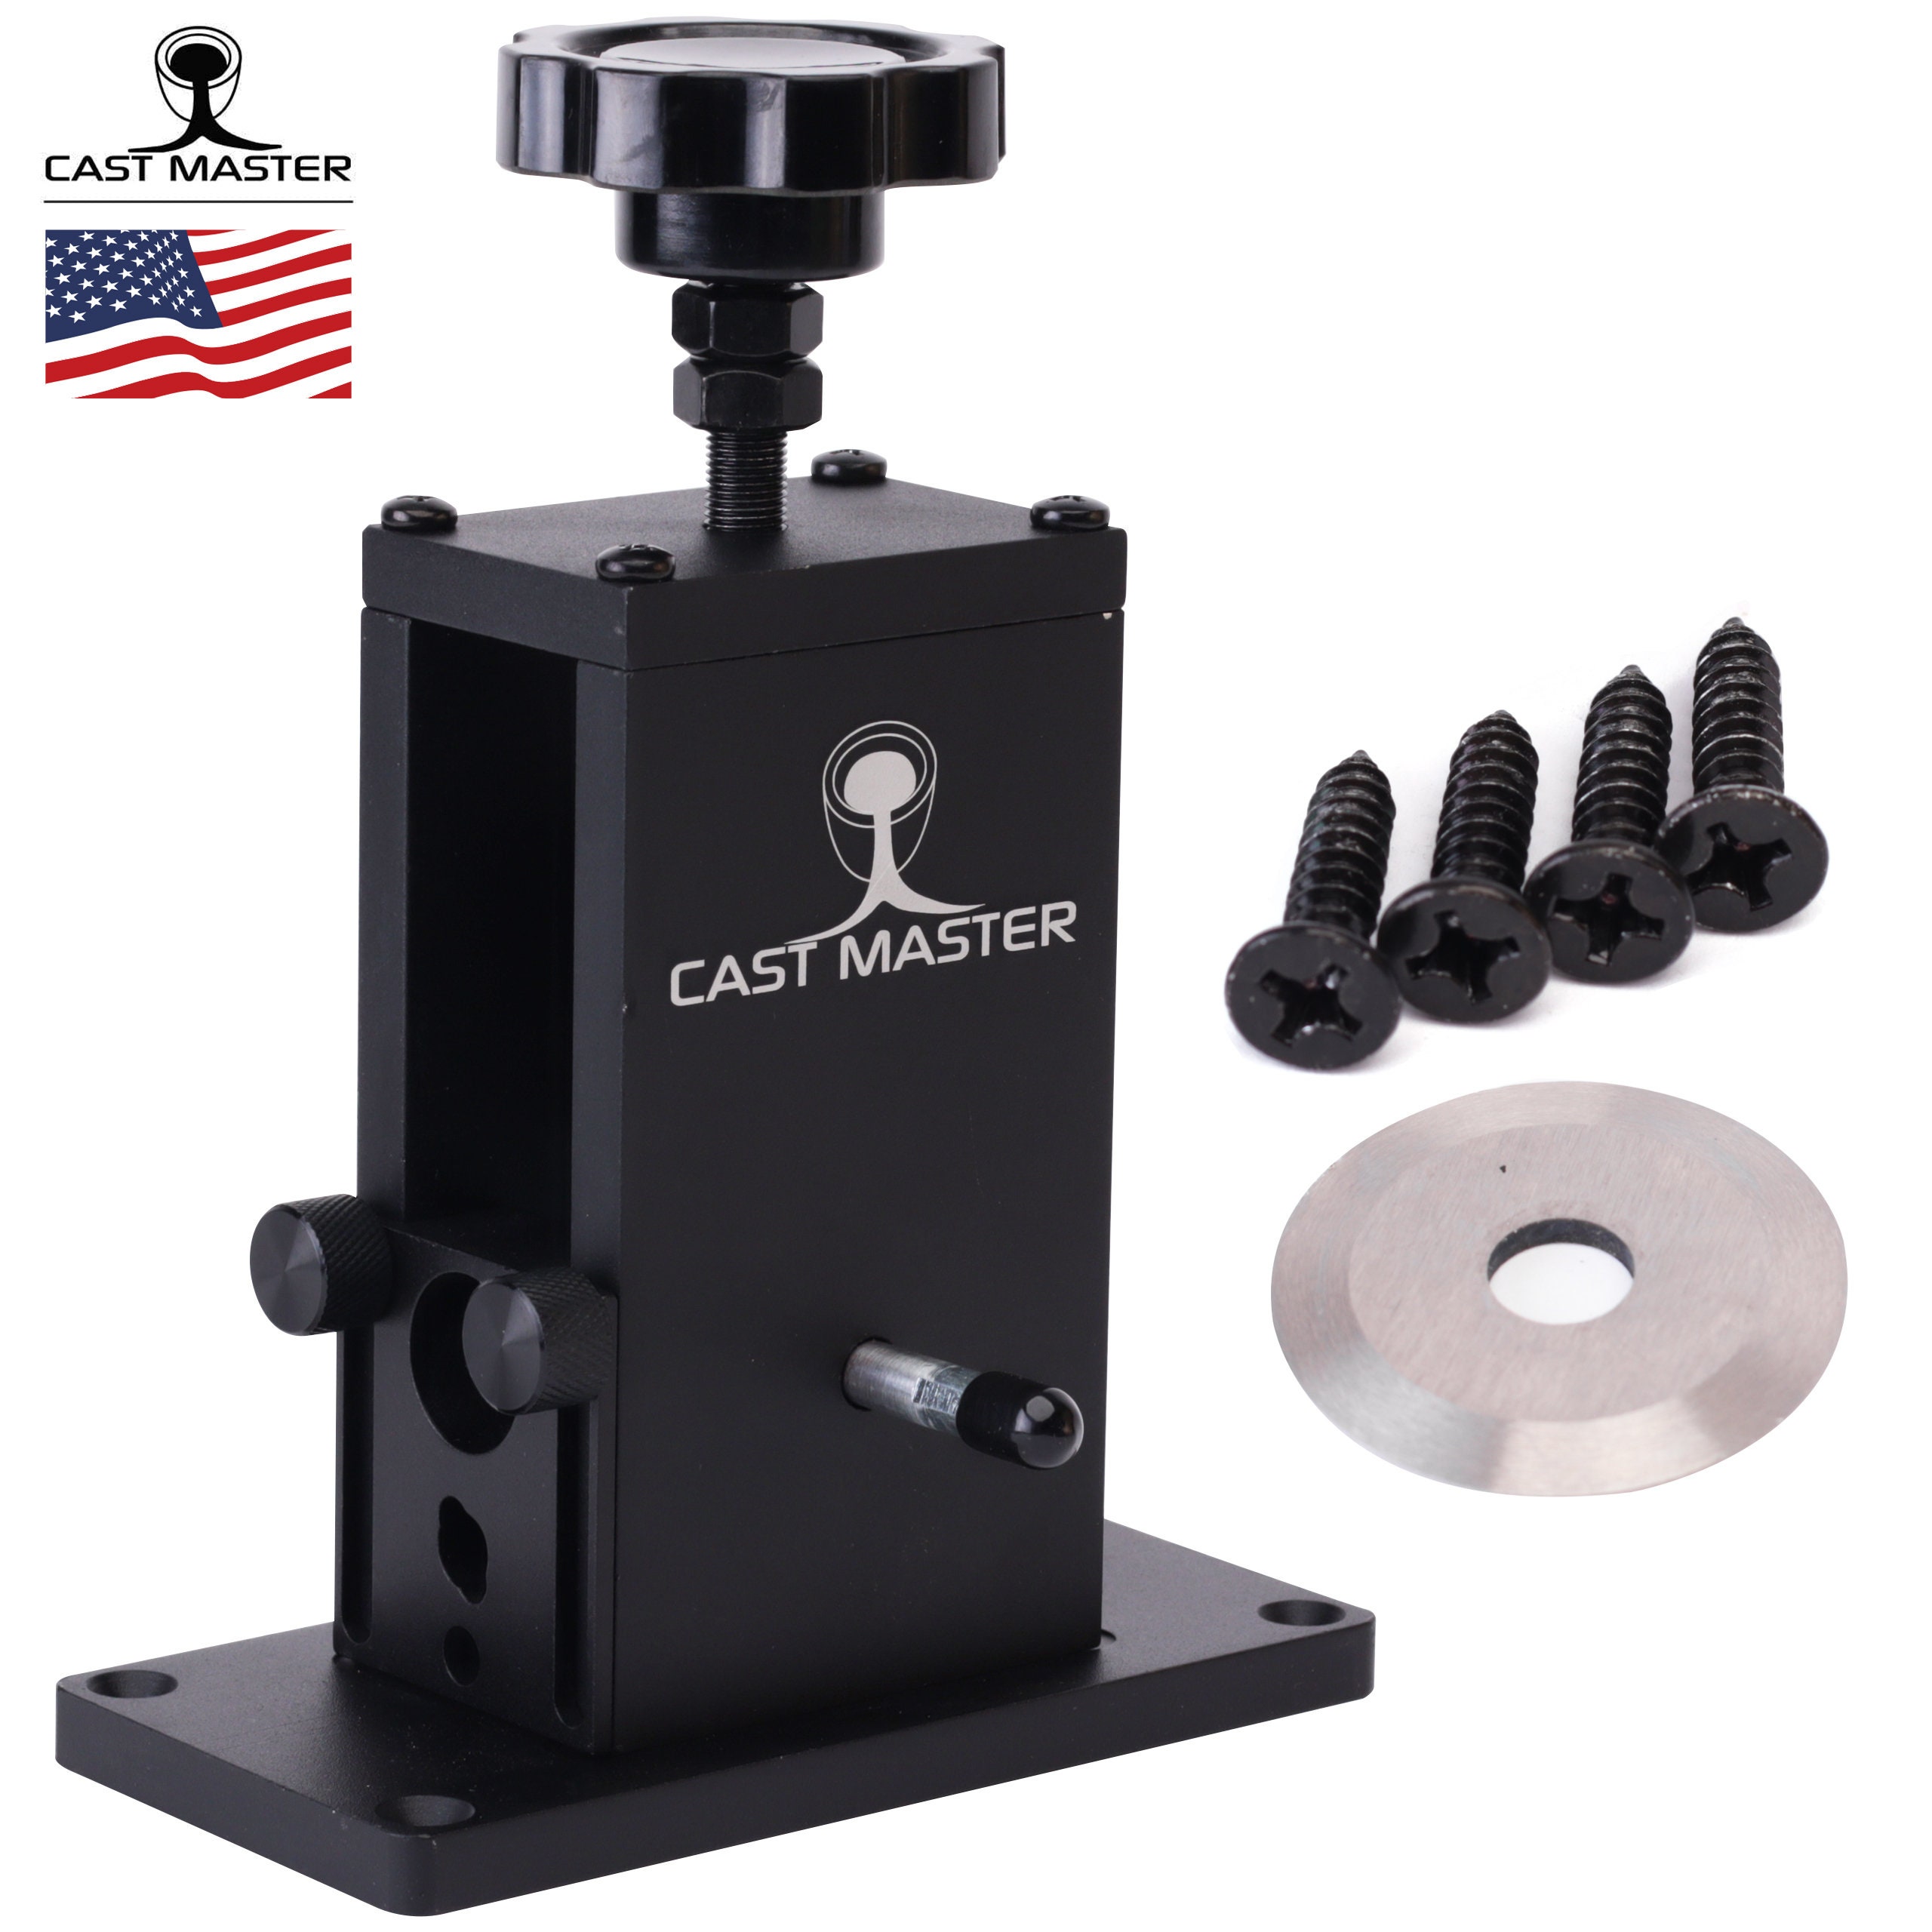 STP 5000 USA Cast Master Drill Operated Copper Wire Stripping